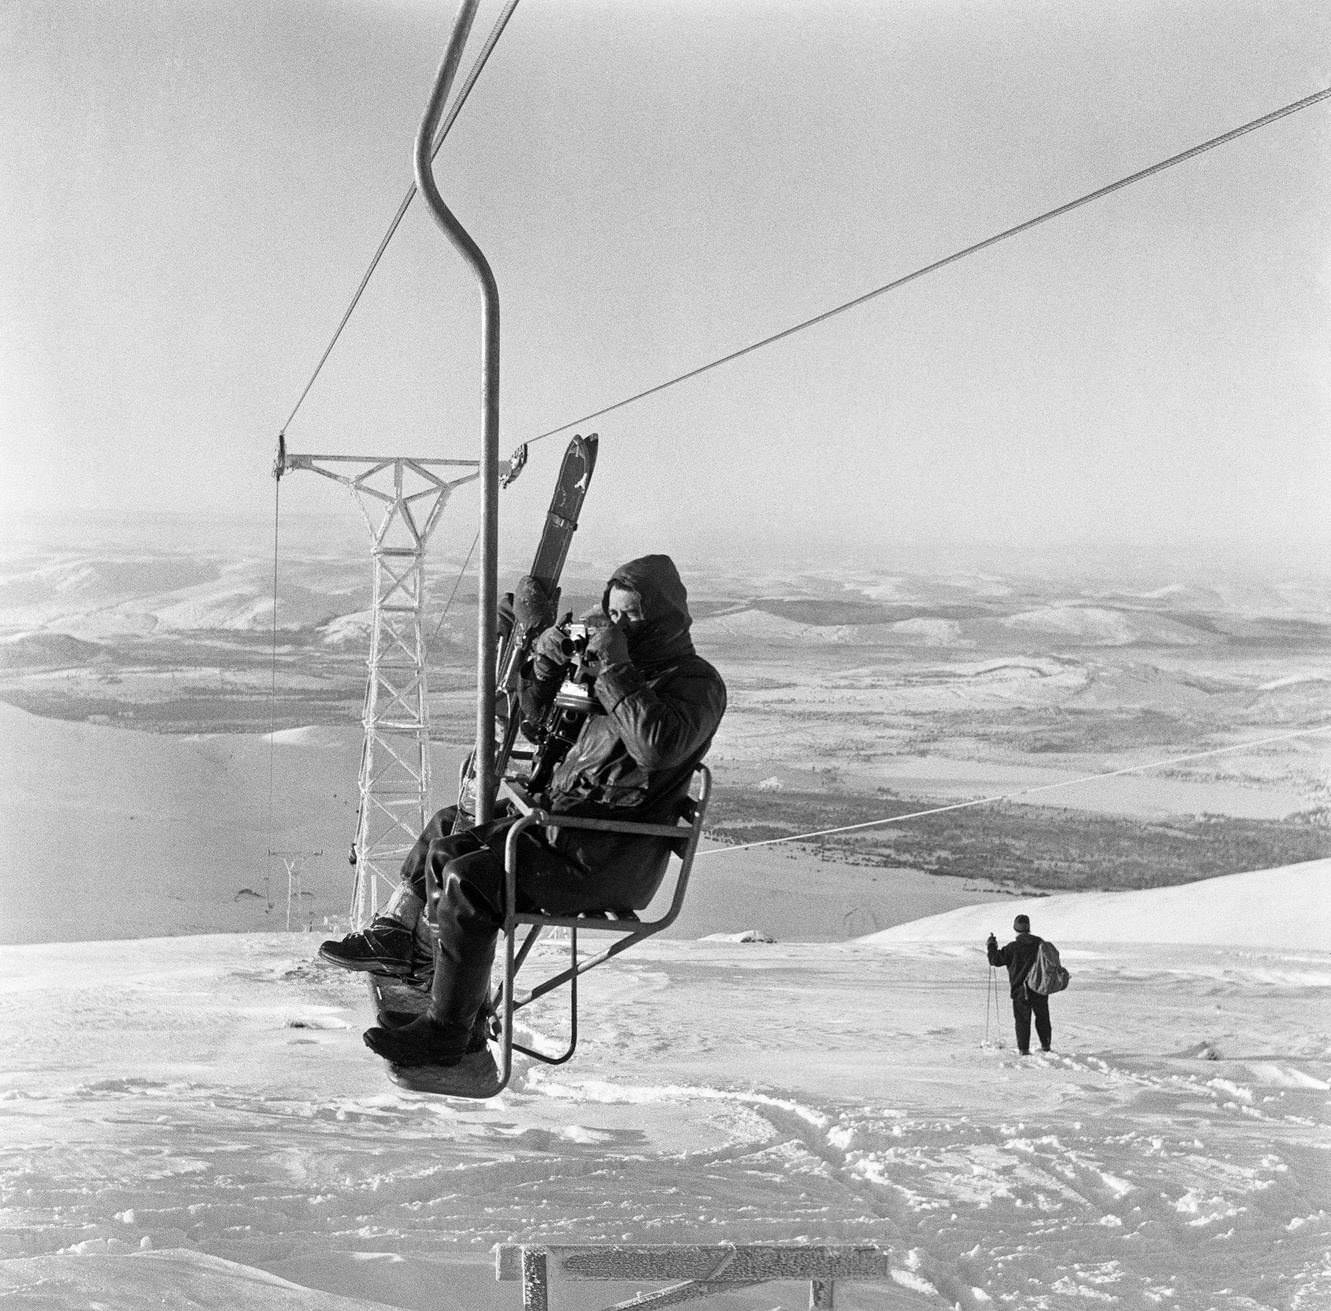 Skiers in the Cairngorms, a mountain range in the eastern Highlands of Scotland, 1962.